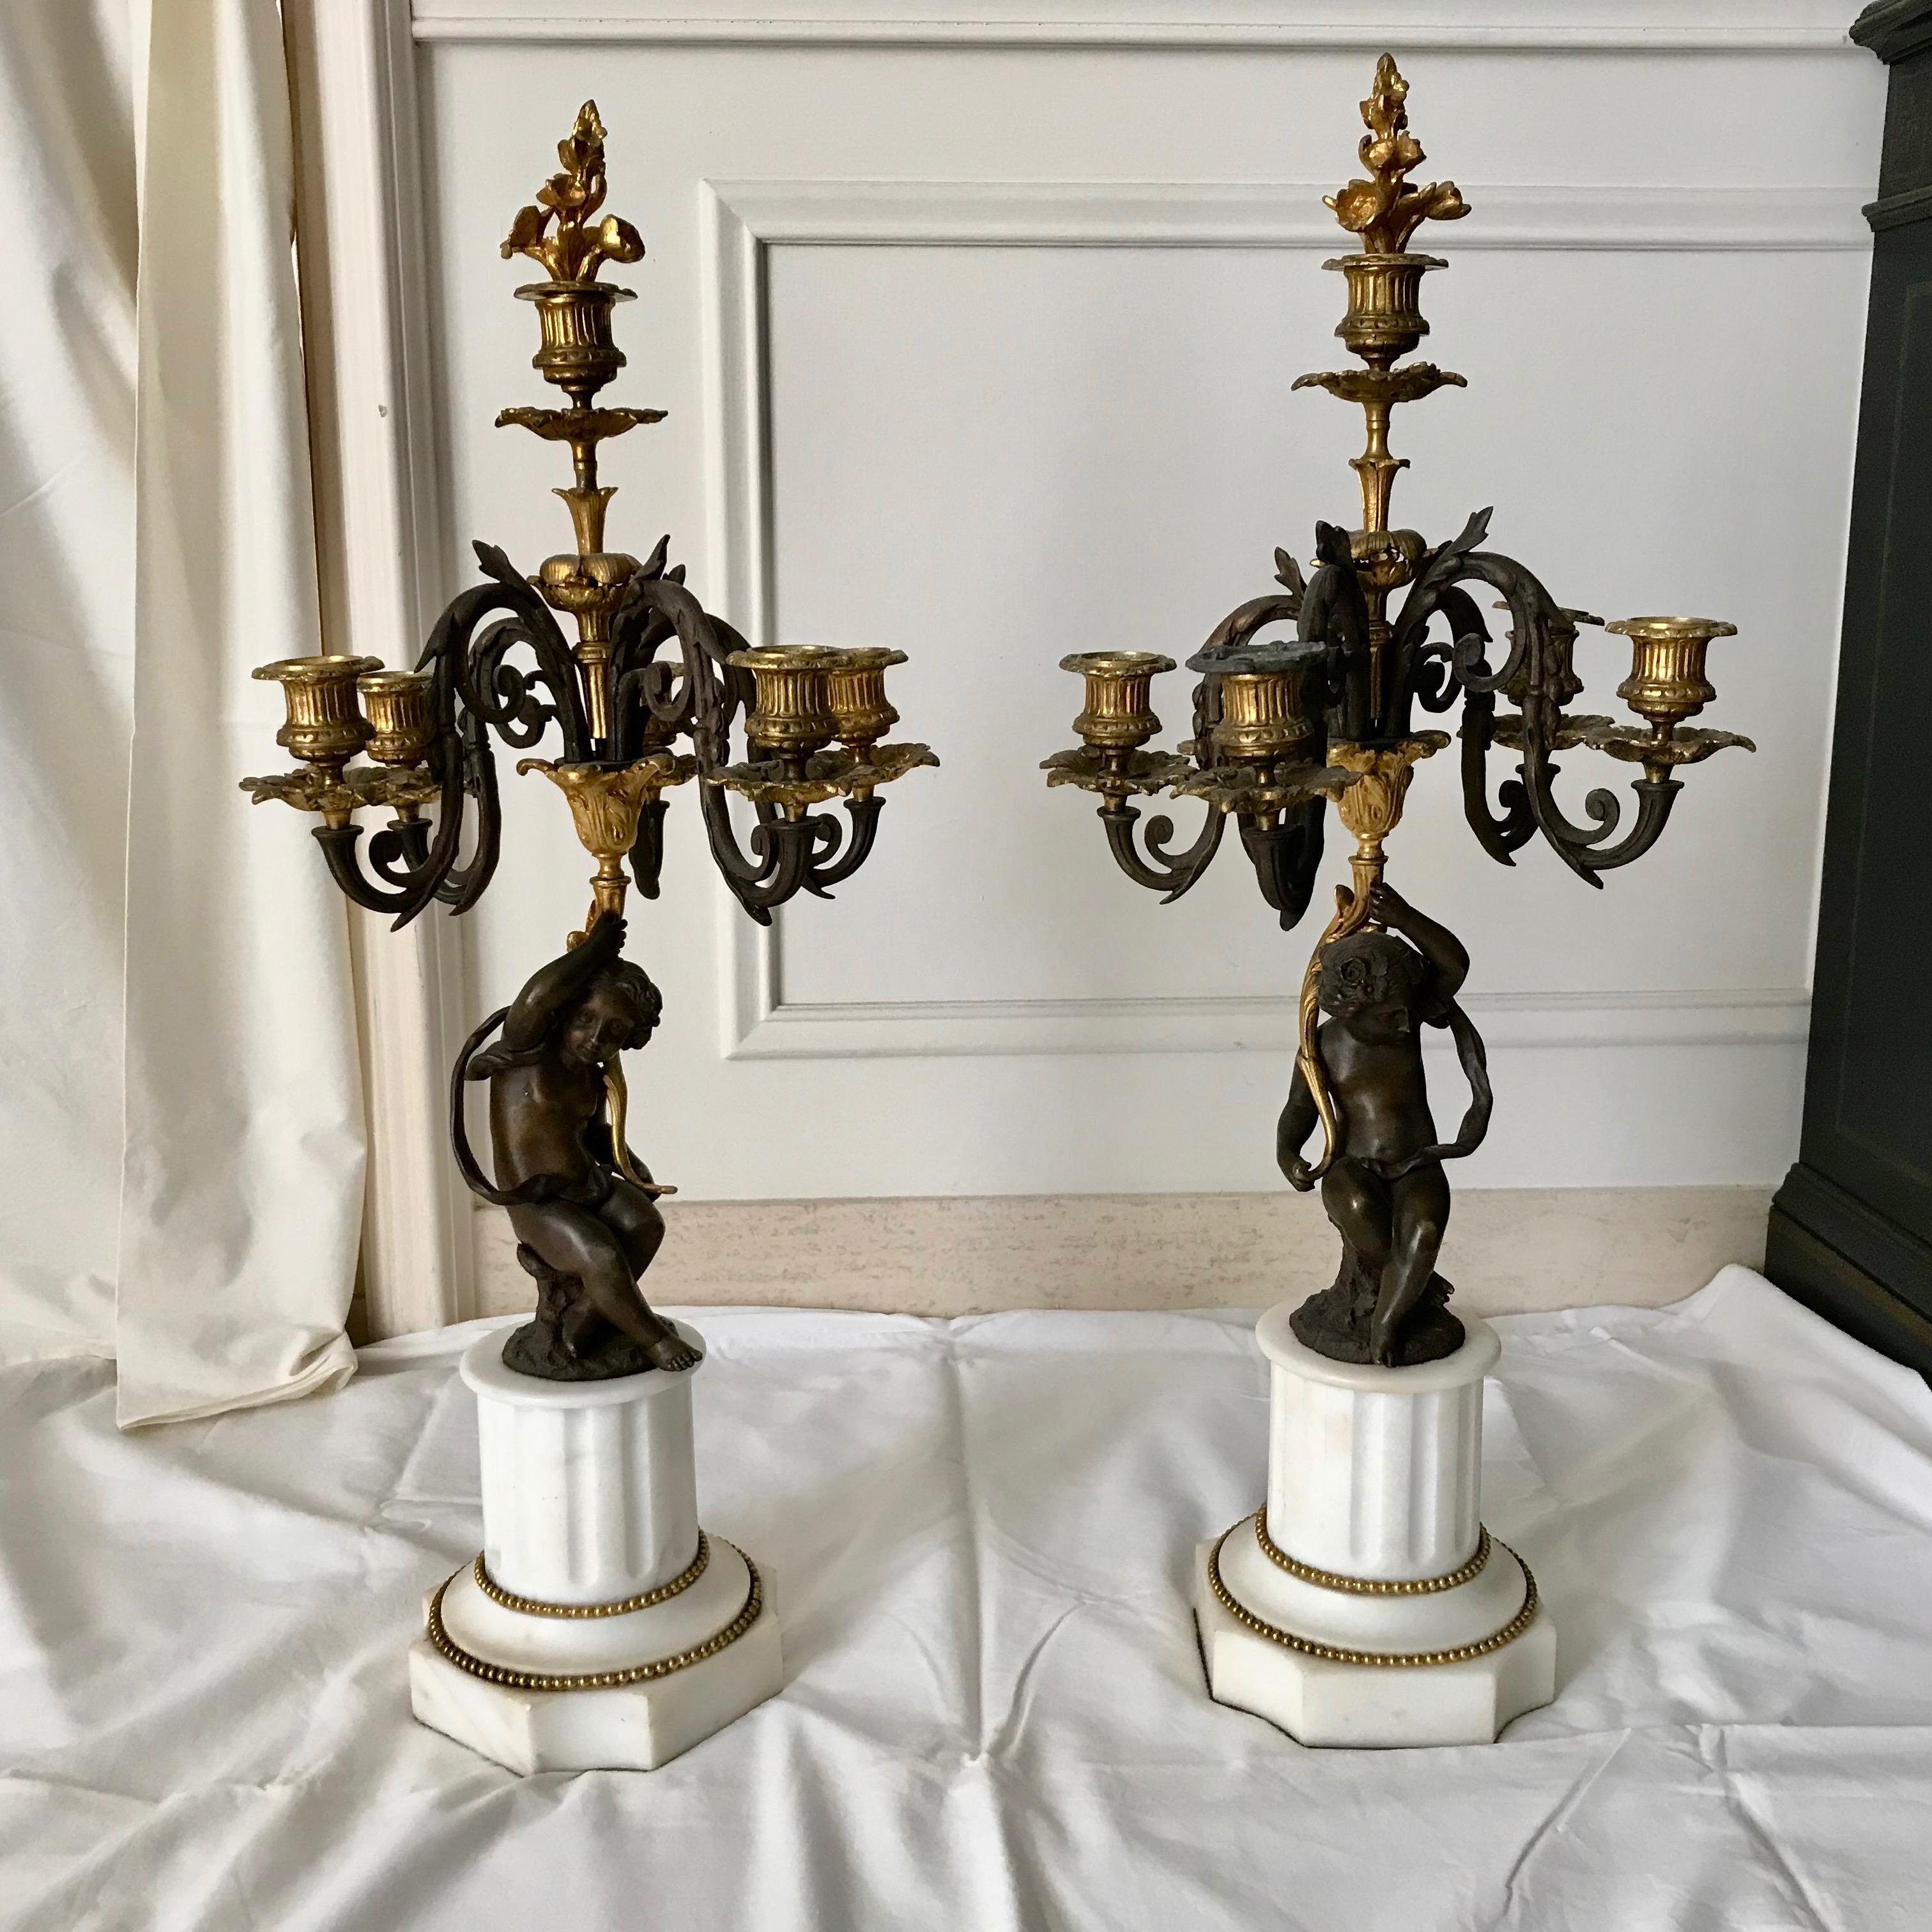 Finely cast in dore' and patinated bronze raised upon marble plinths.
The candelabras are a stately size. In addition: the top portions are removable.
Candle snuffers- as photographed.
Measurements include snuffer inserts which are original.